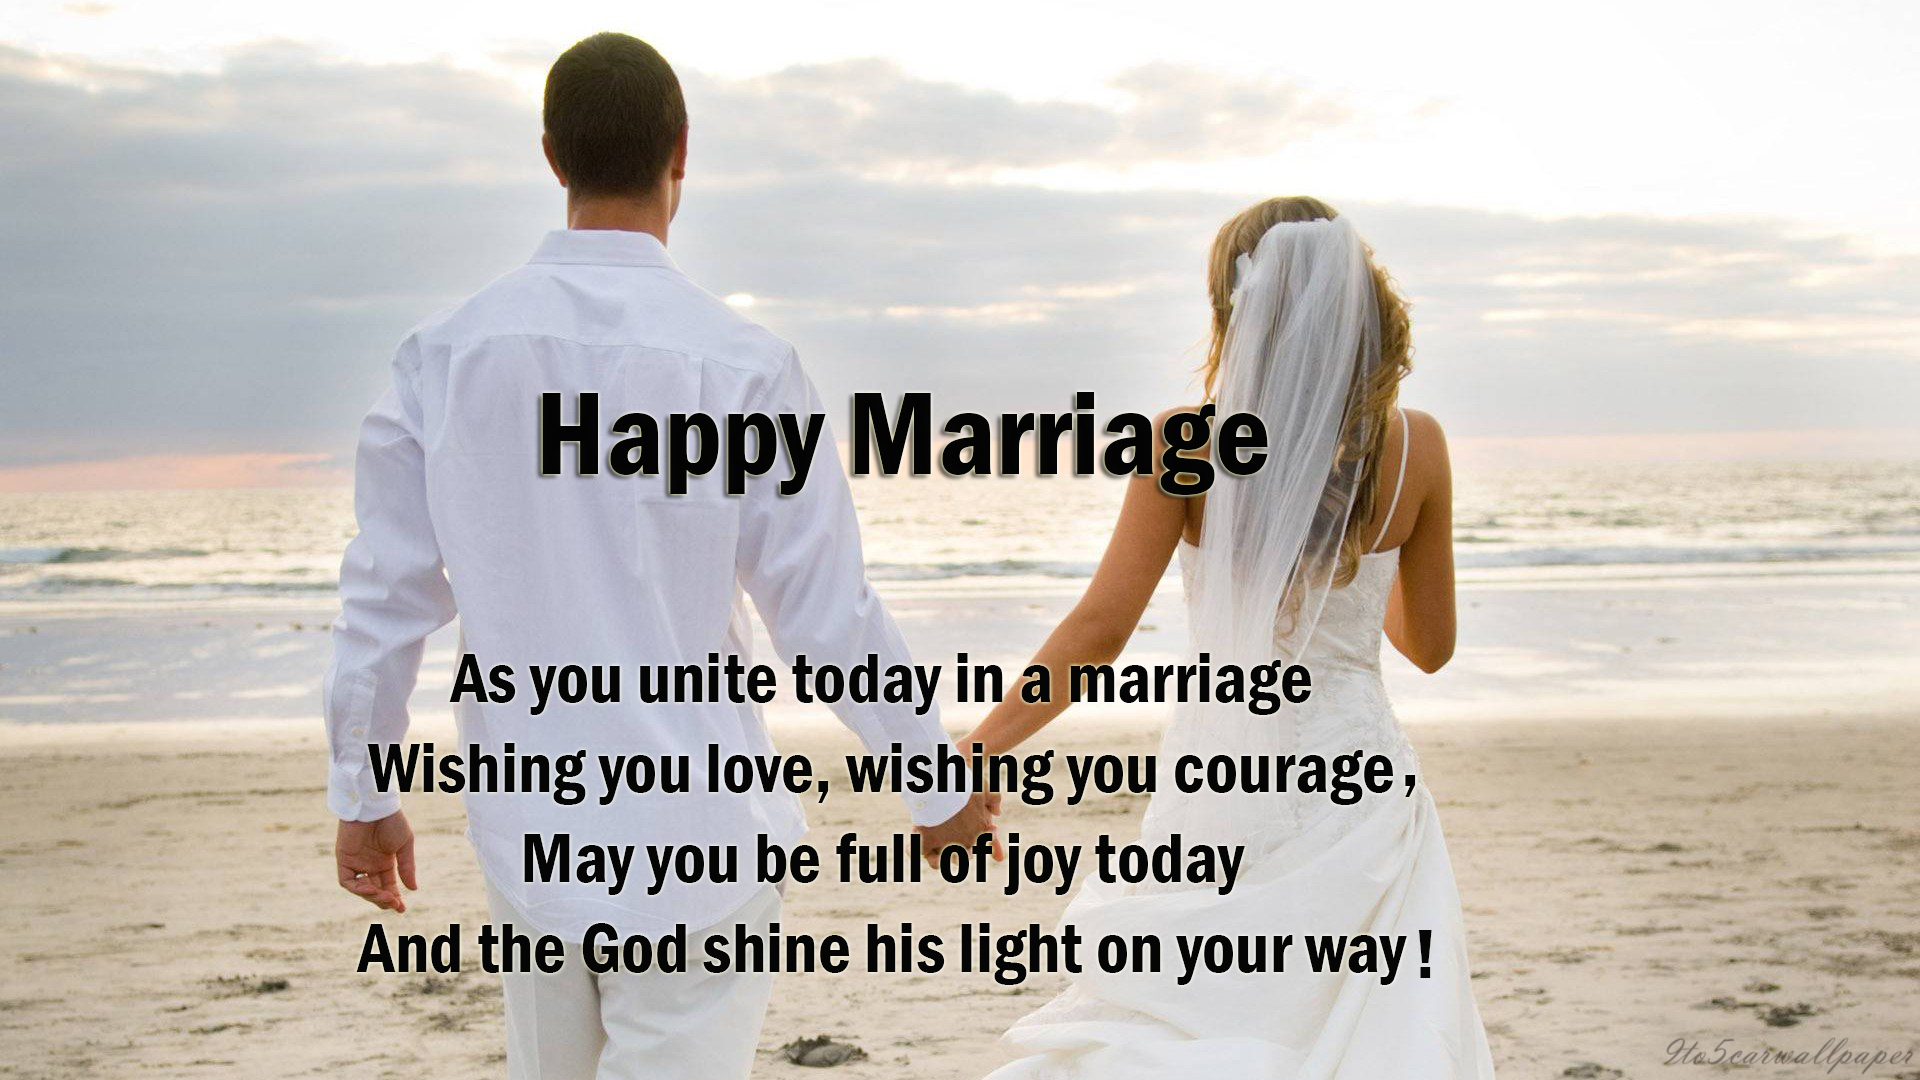 Lovely Marriage Wishes & Quotes 2017.